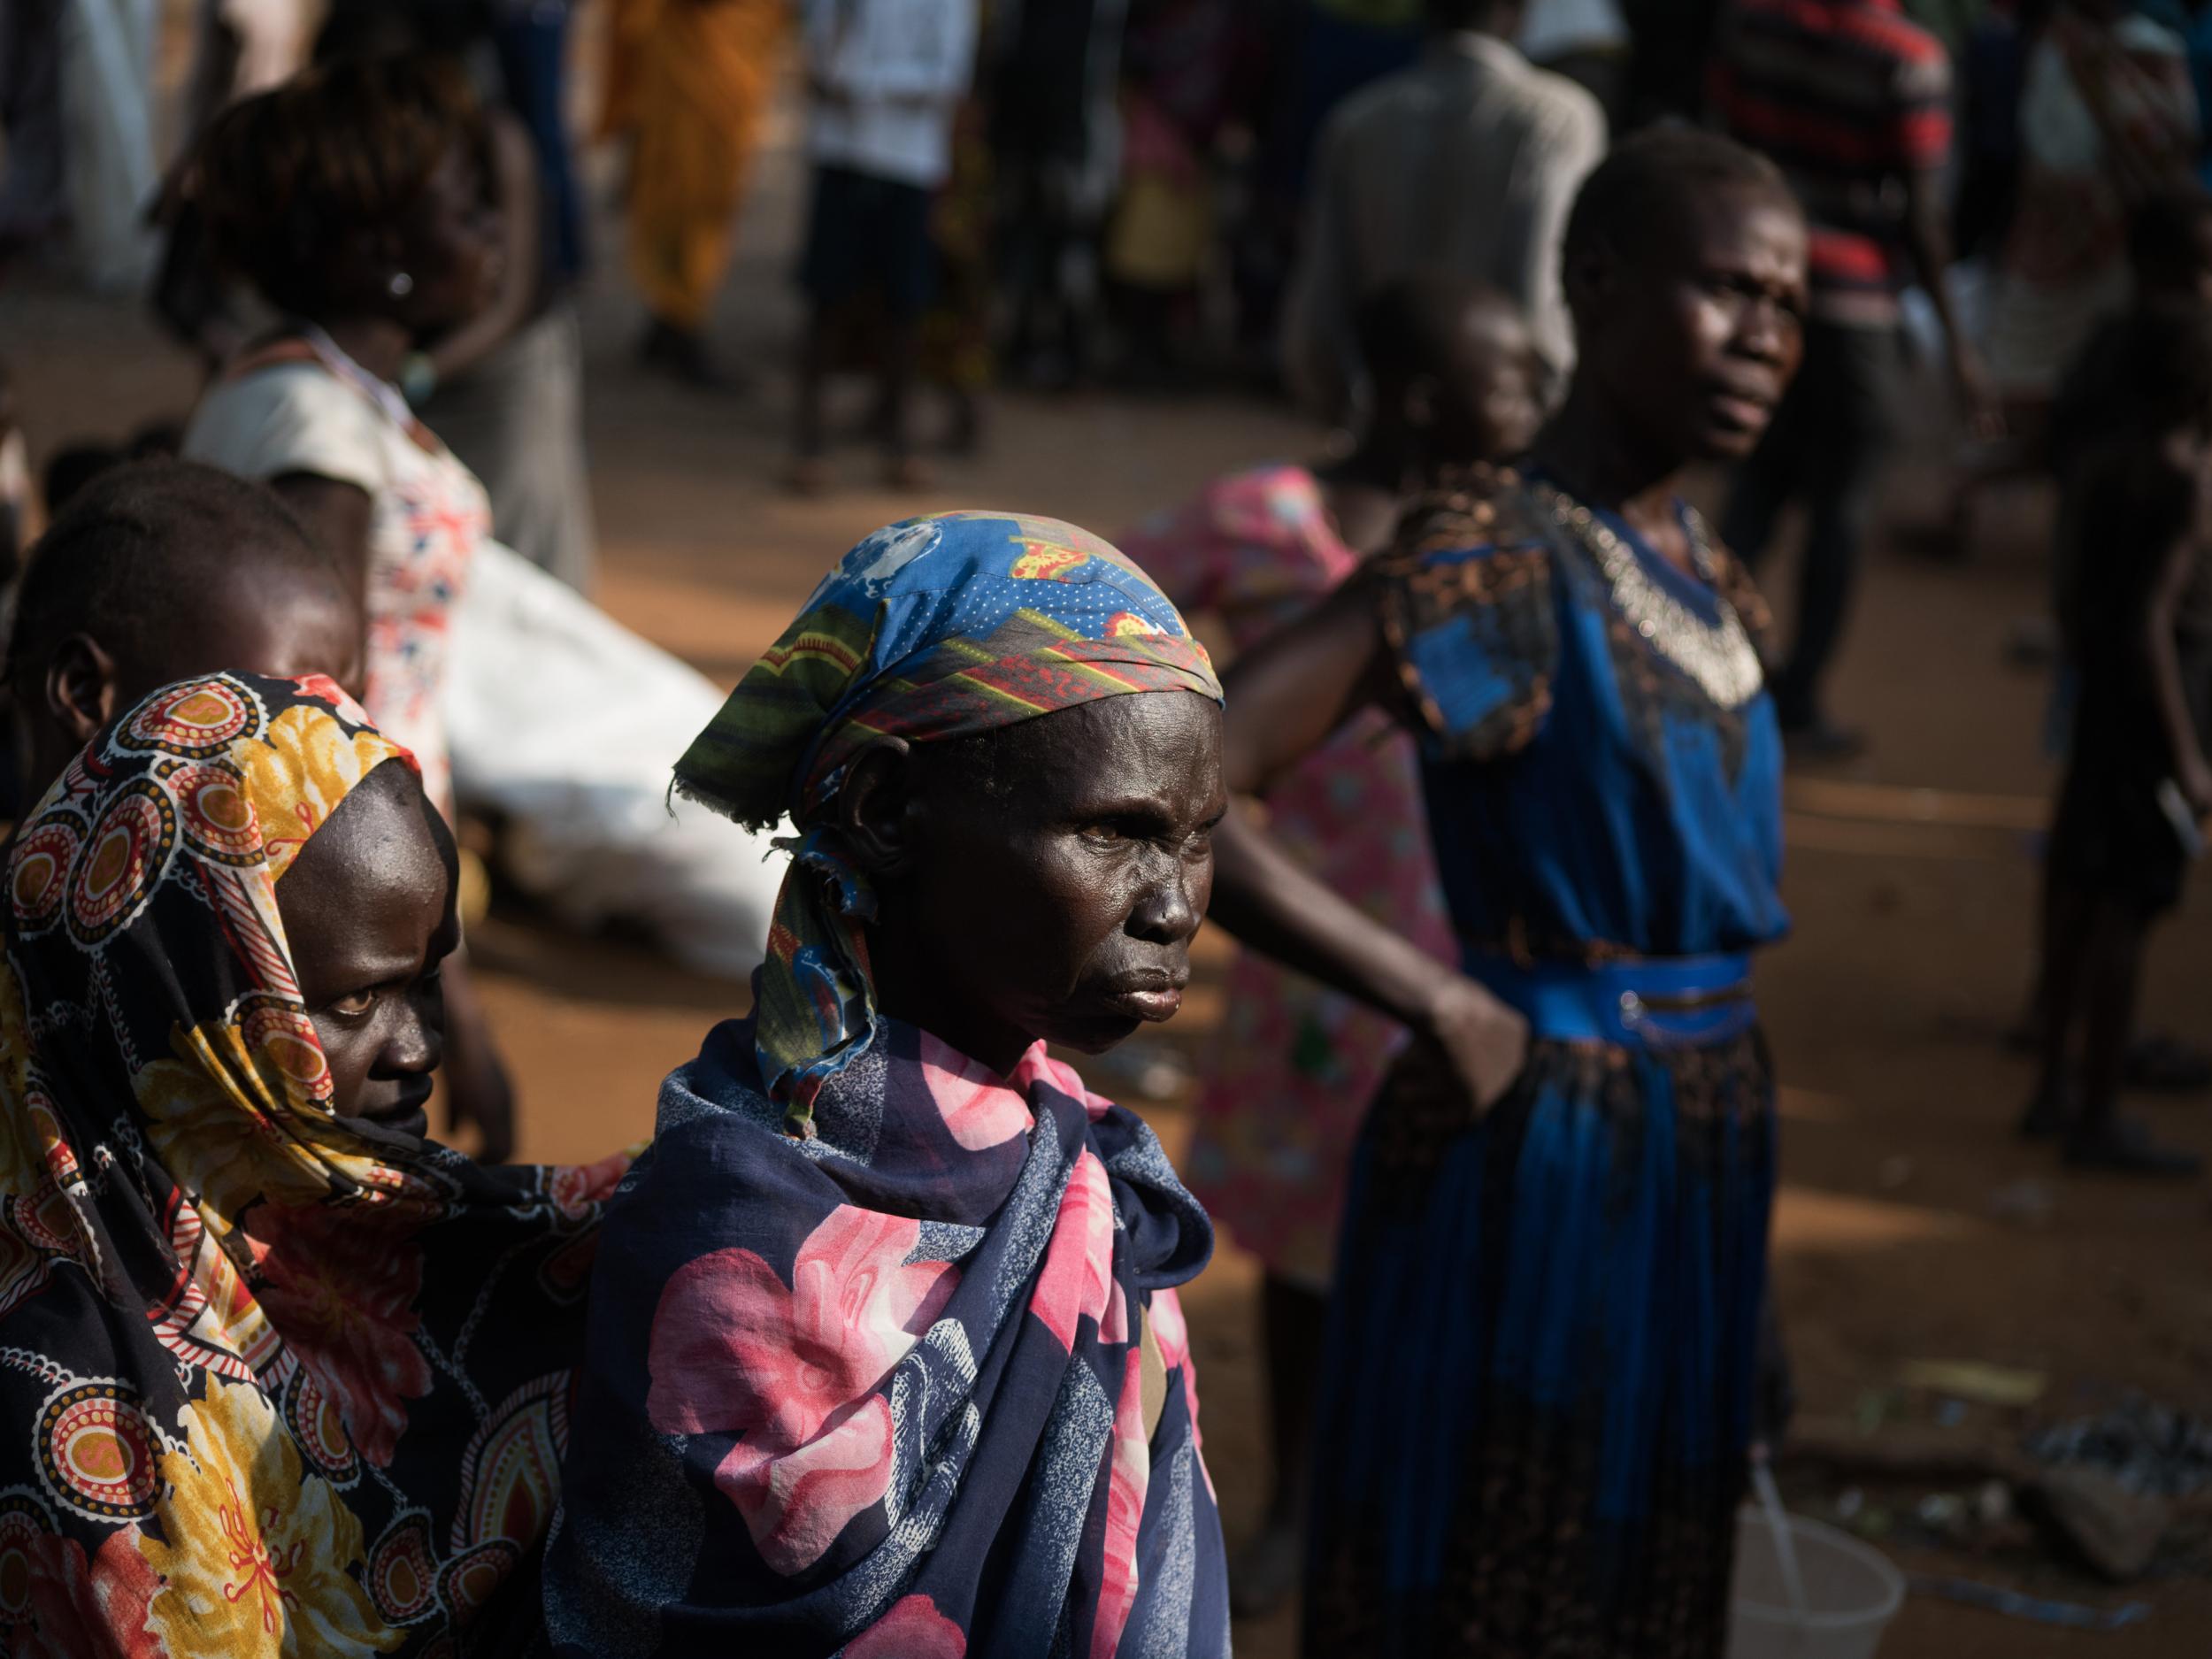 Families wait after they have find shelter in Saint Joseph's church compound in Juba earlier this month